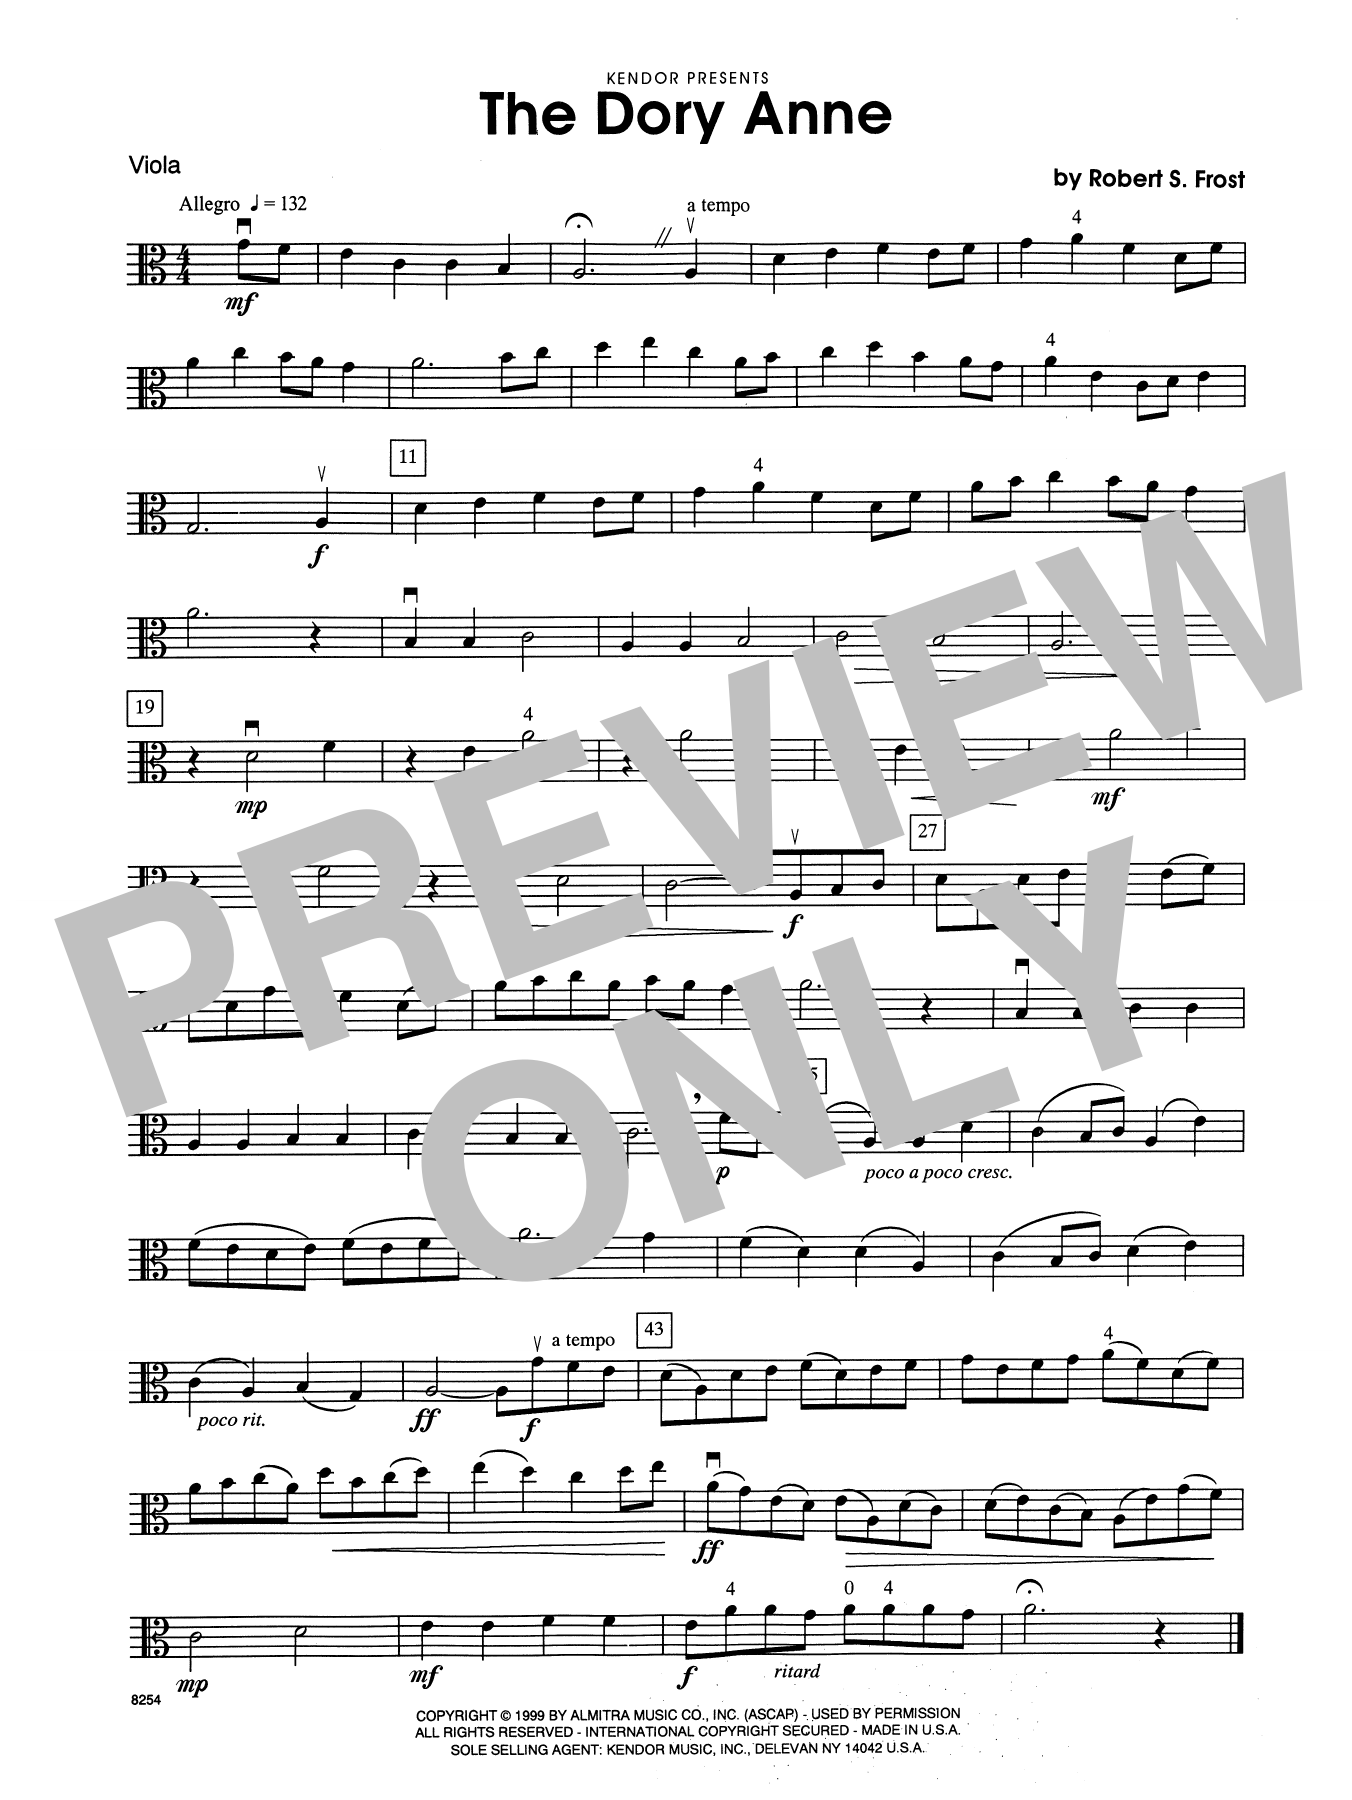 Download Robert S. Frost The Dory Anne - Viola Sheet Music